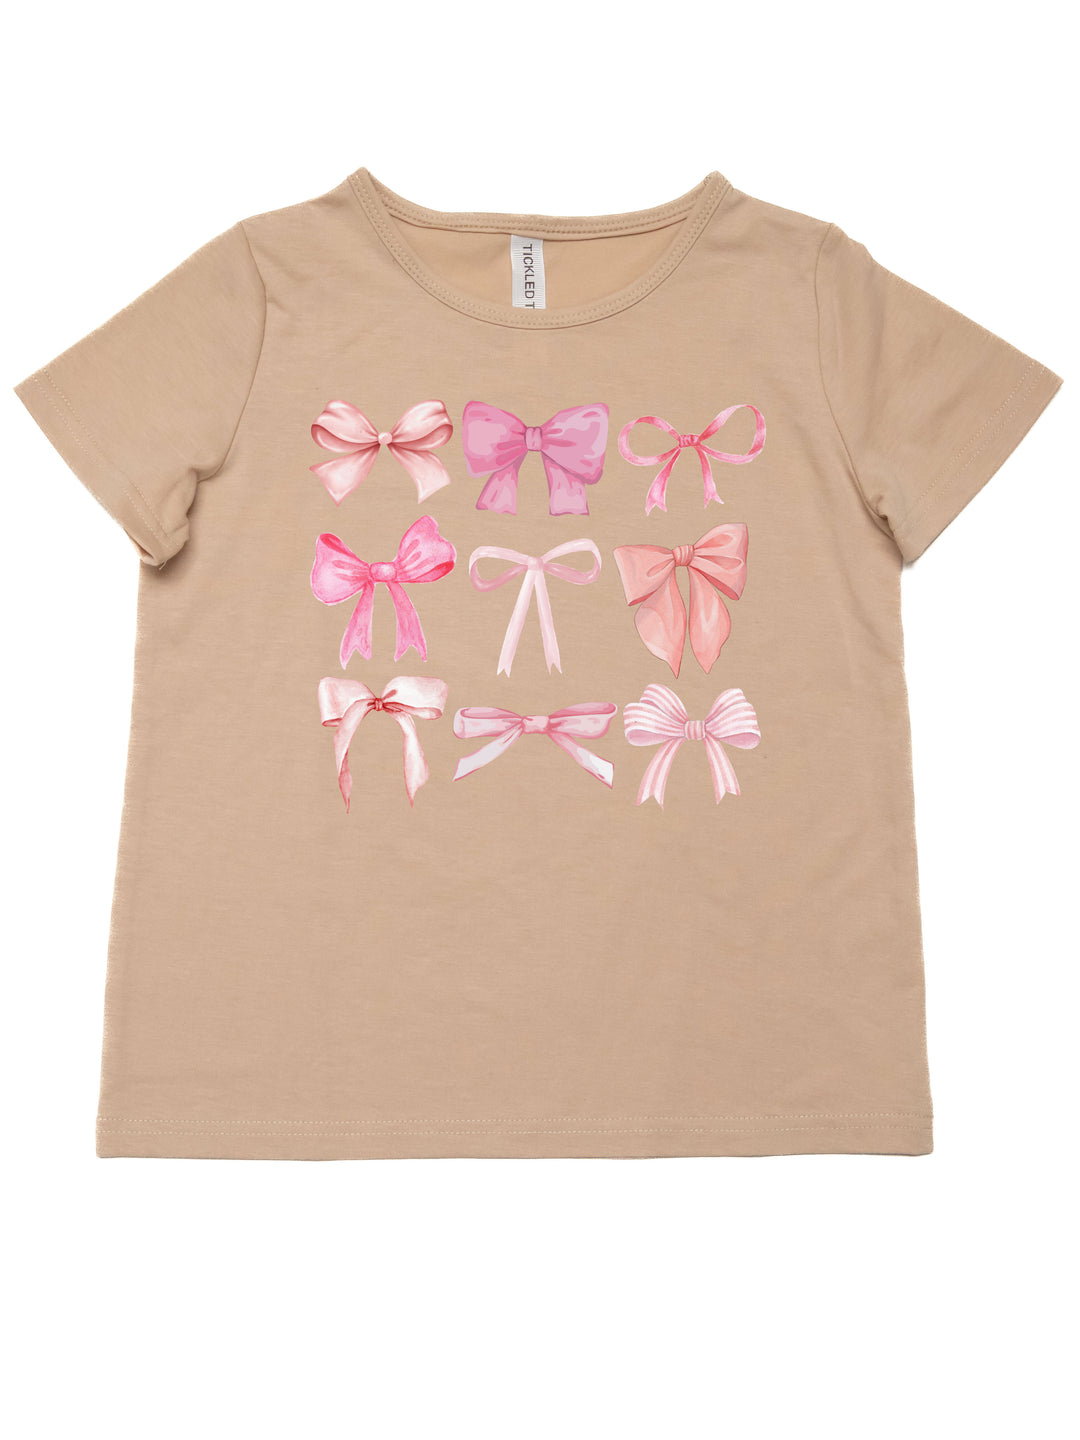 Pink Bows Kids Graphic Tee